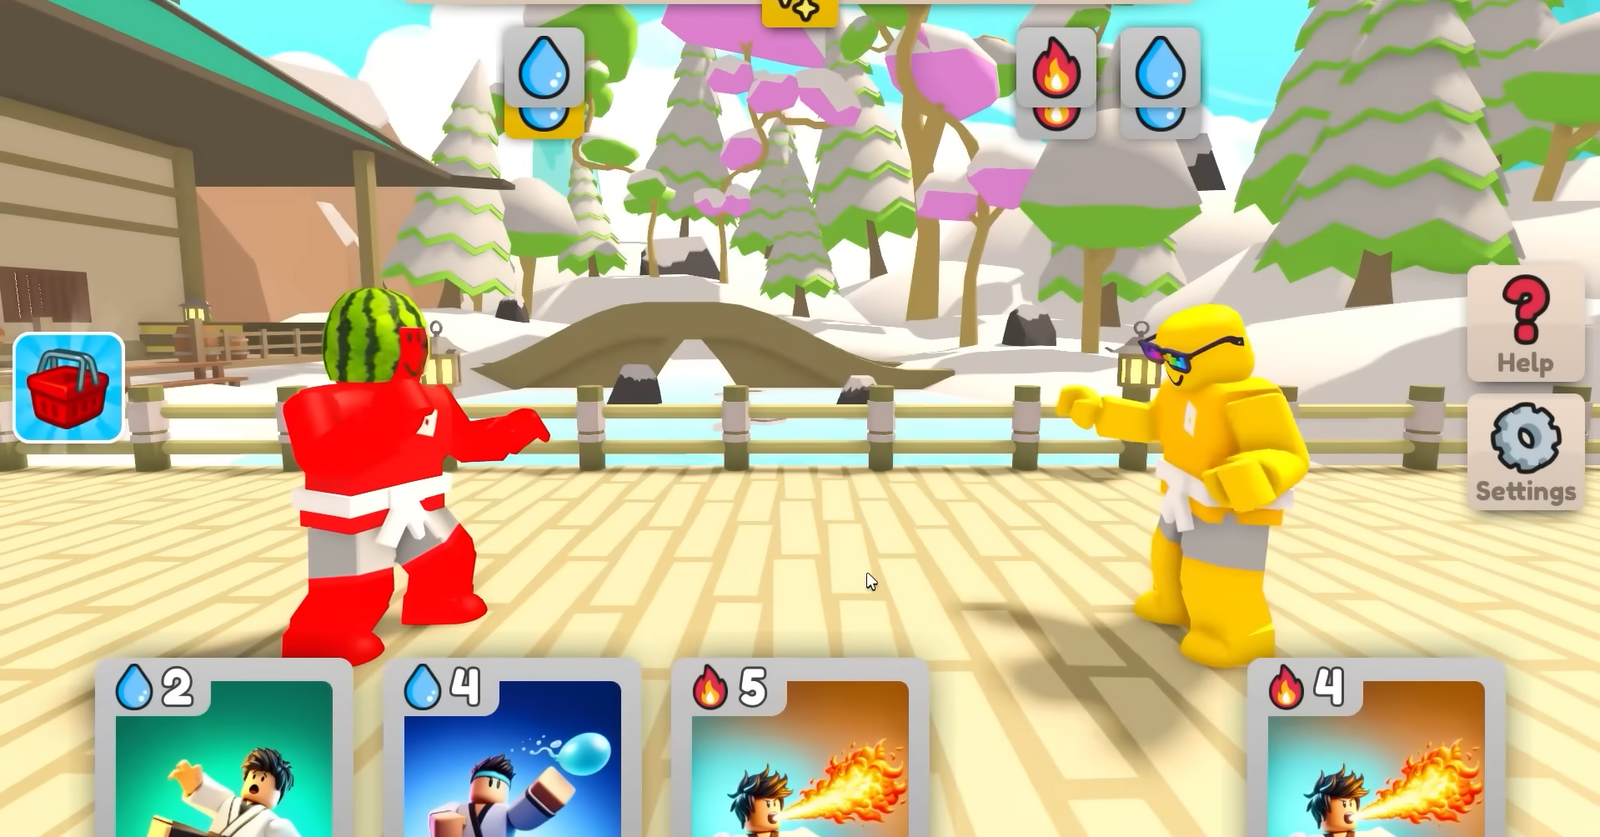 Two Roblox characters fighting against each other in Card Battles.